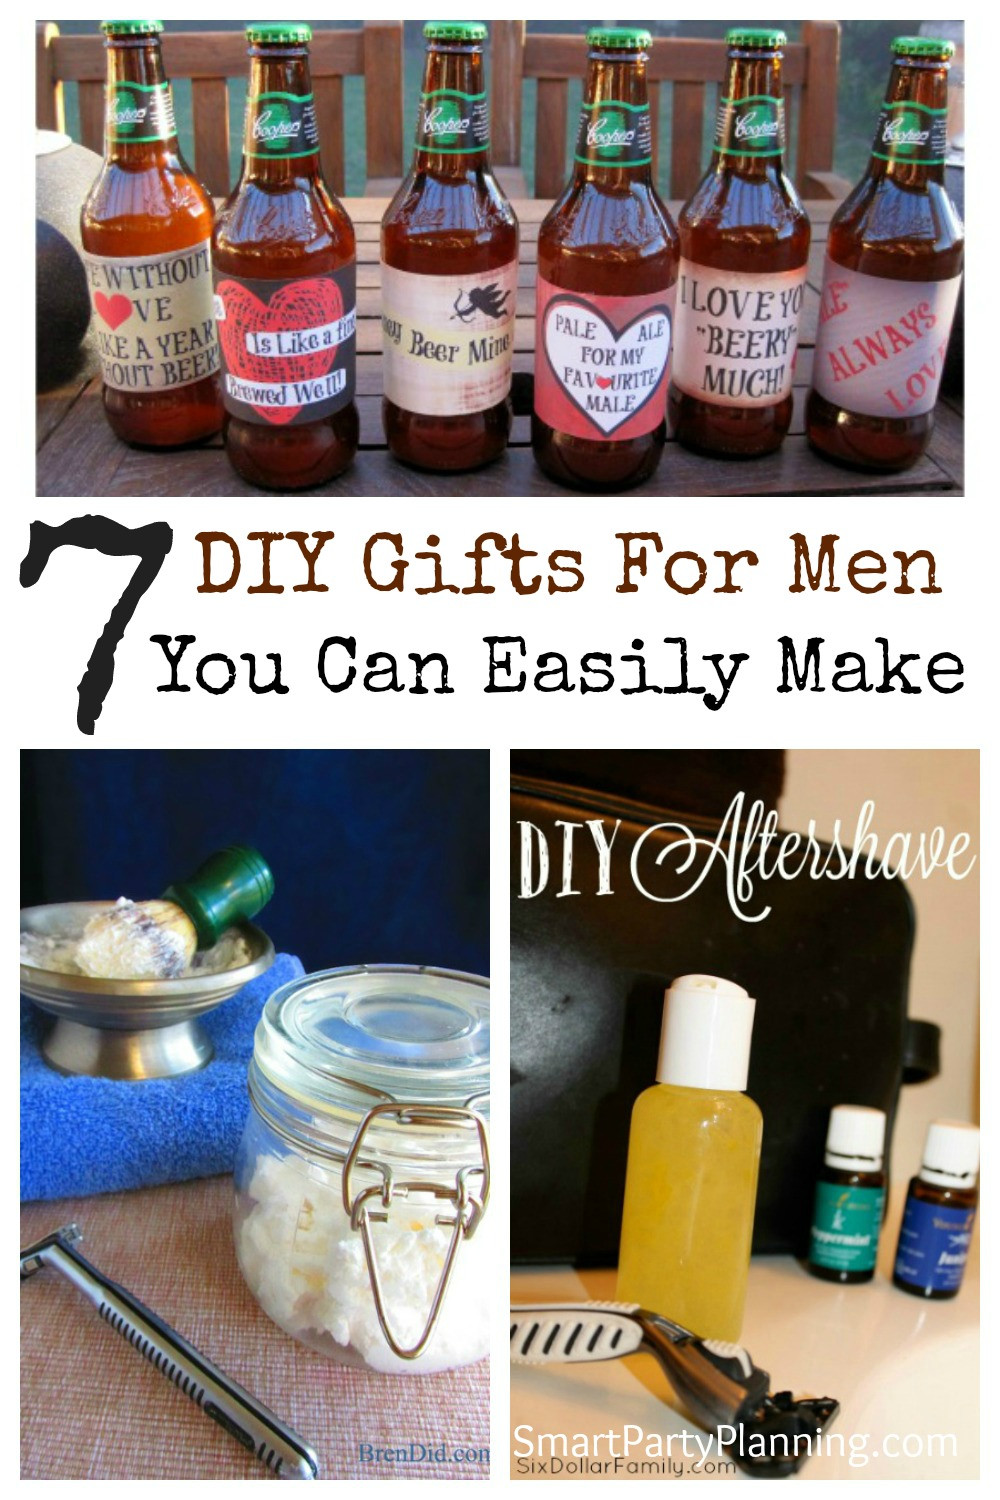 Unconventional Valentines Gift Ideas
 7 DIY Gifts For Men You Can Easily Make